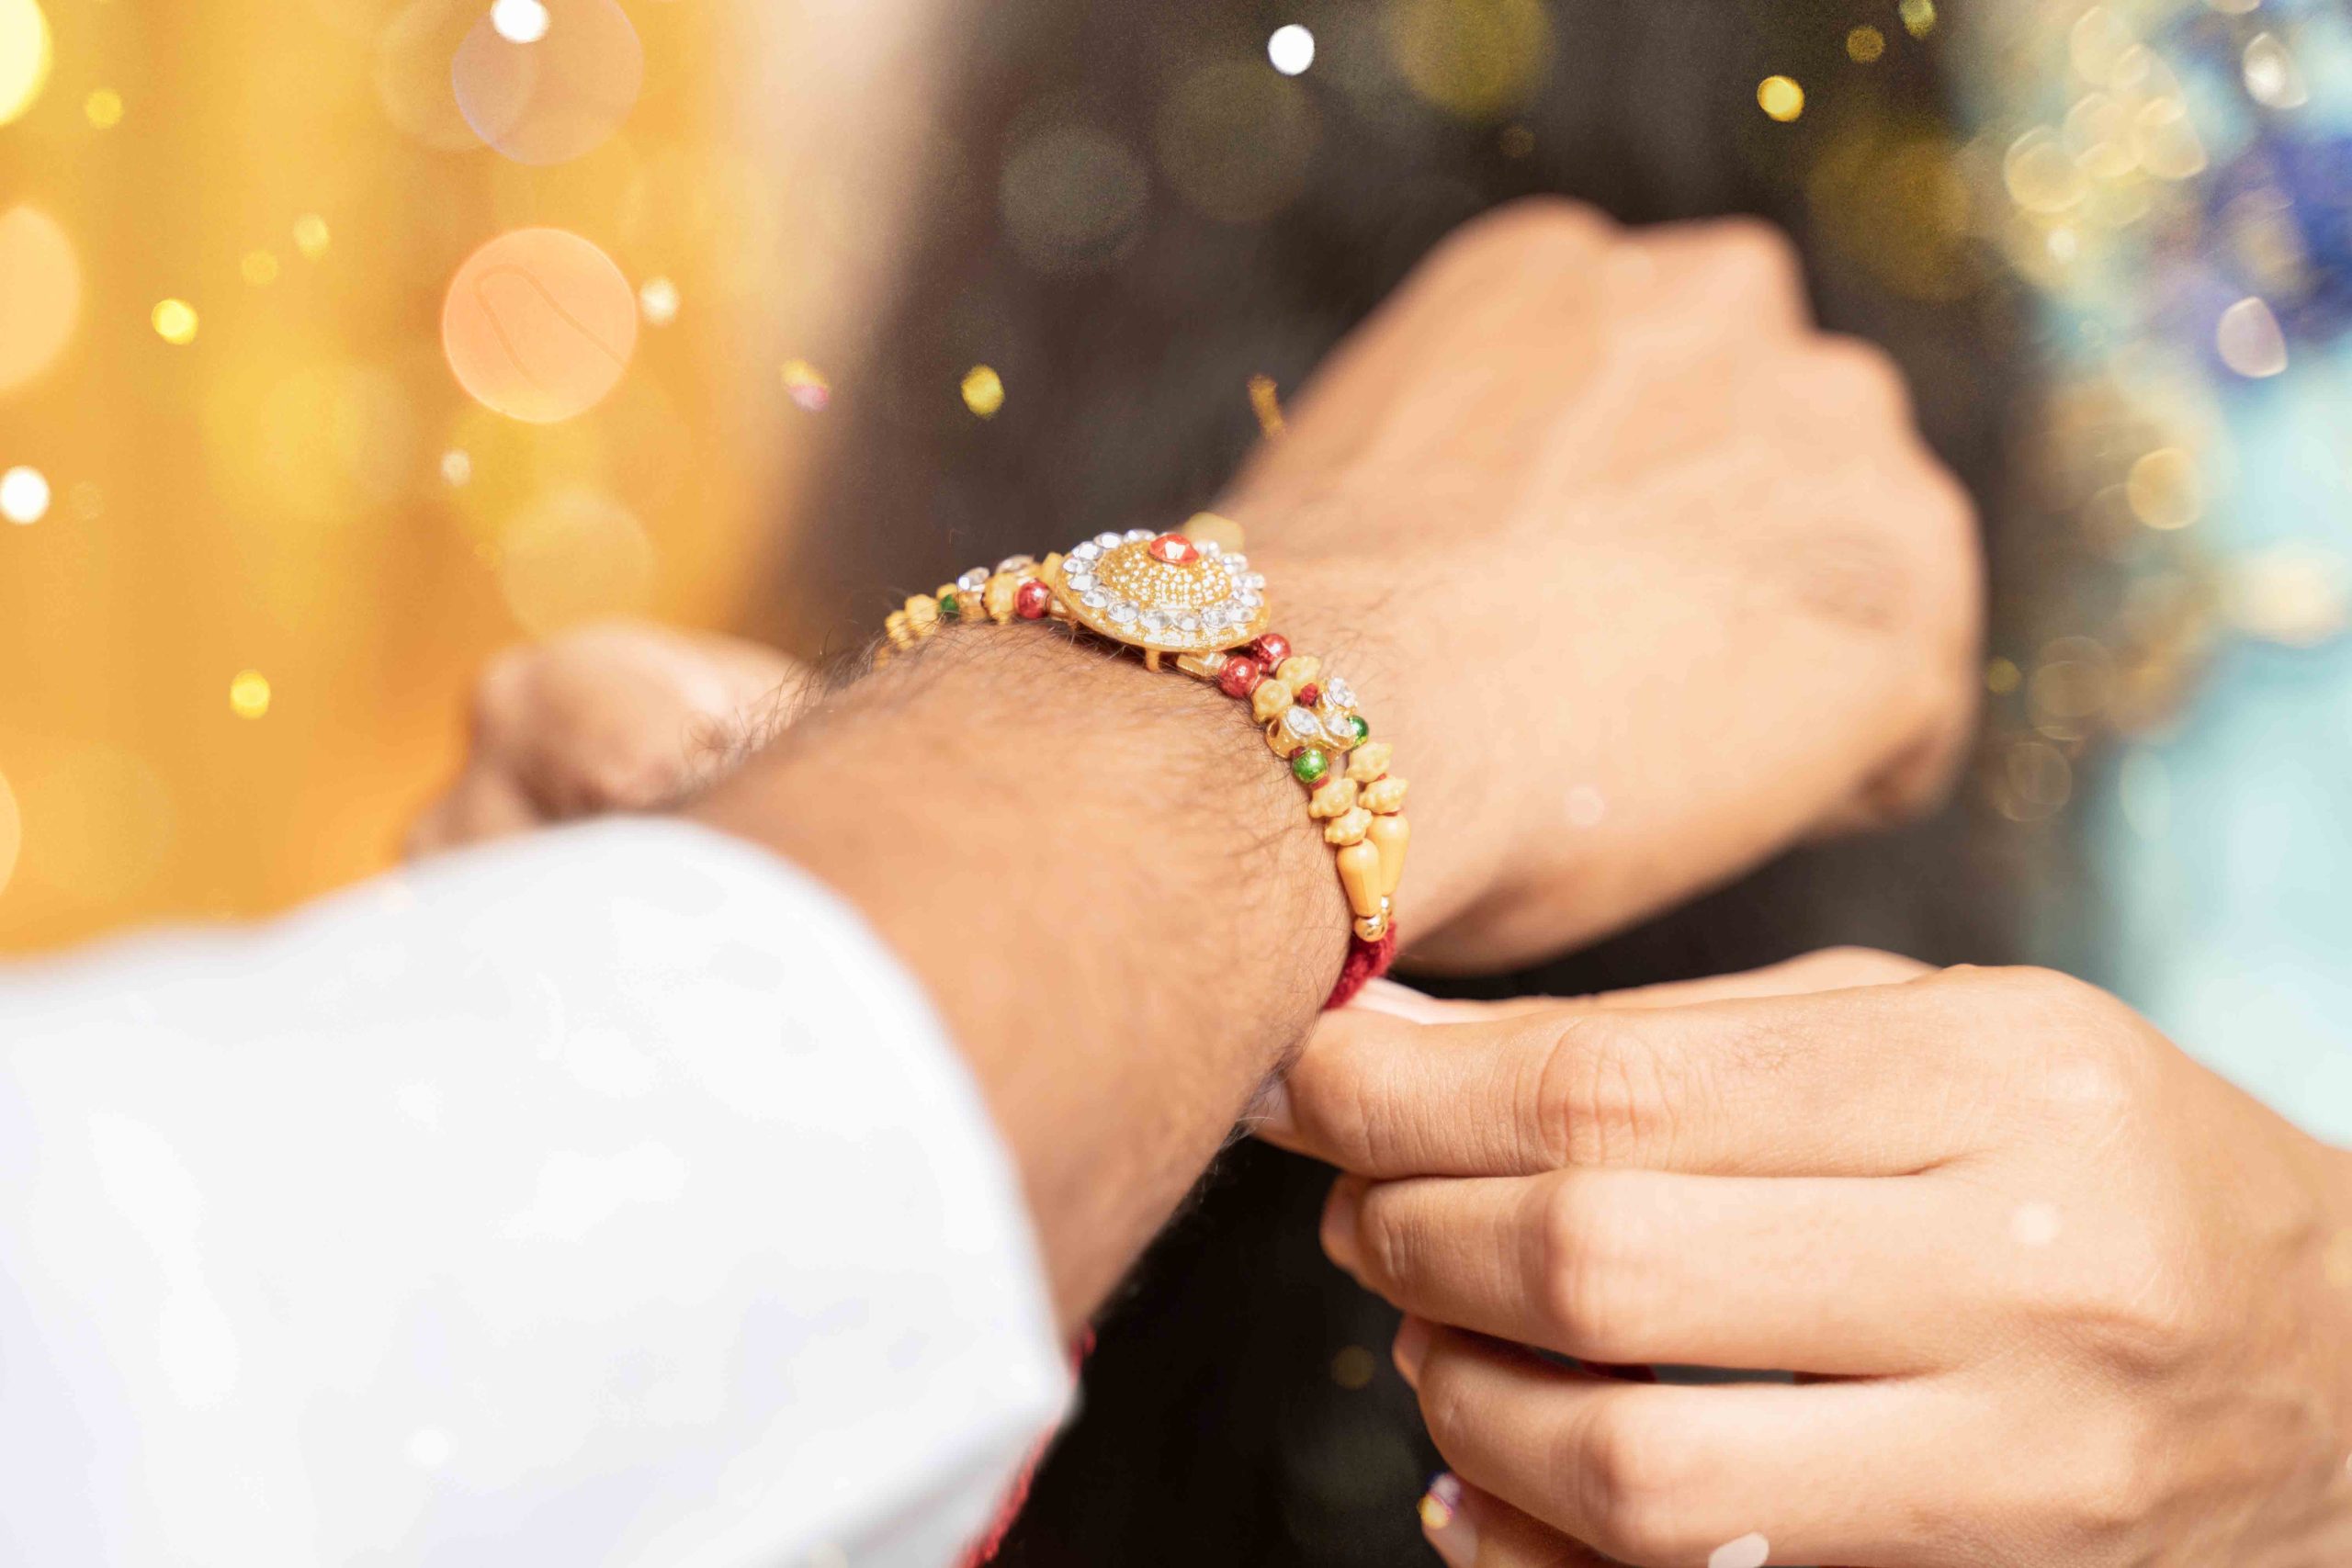 NCPCR asks schools to refrain from punishing students for wearing Rakhis, Tilak, and Mehendi